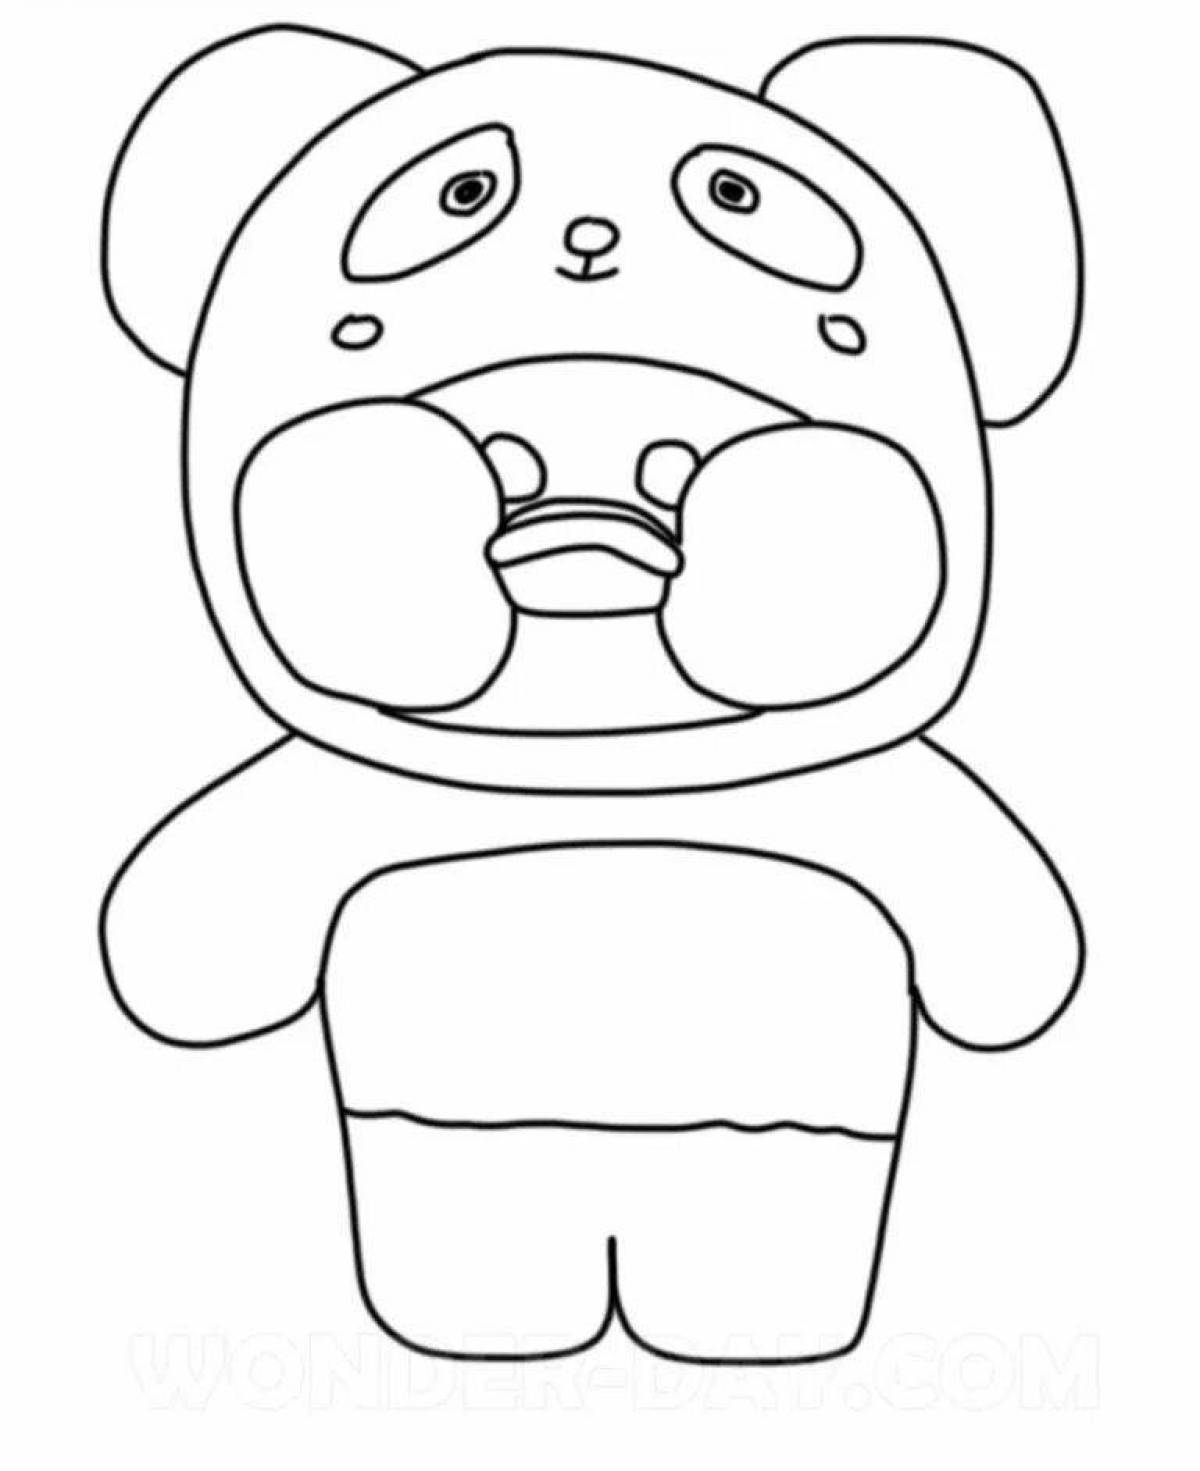 Irresistible duck coloring pages lala fanfan